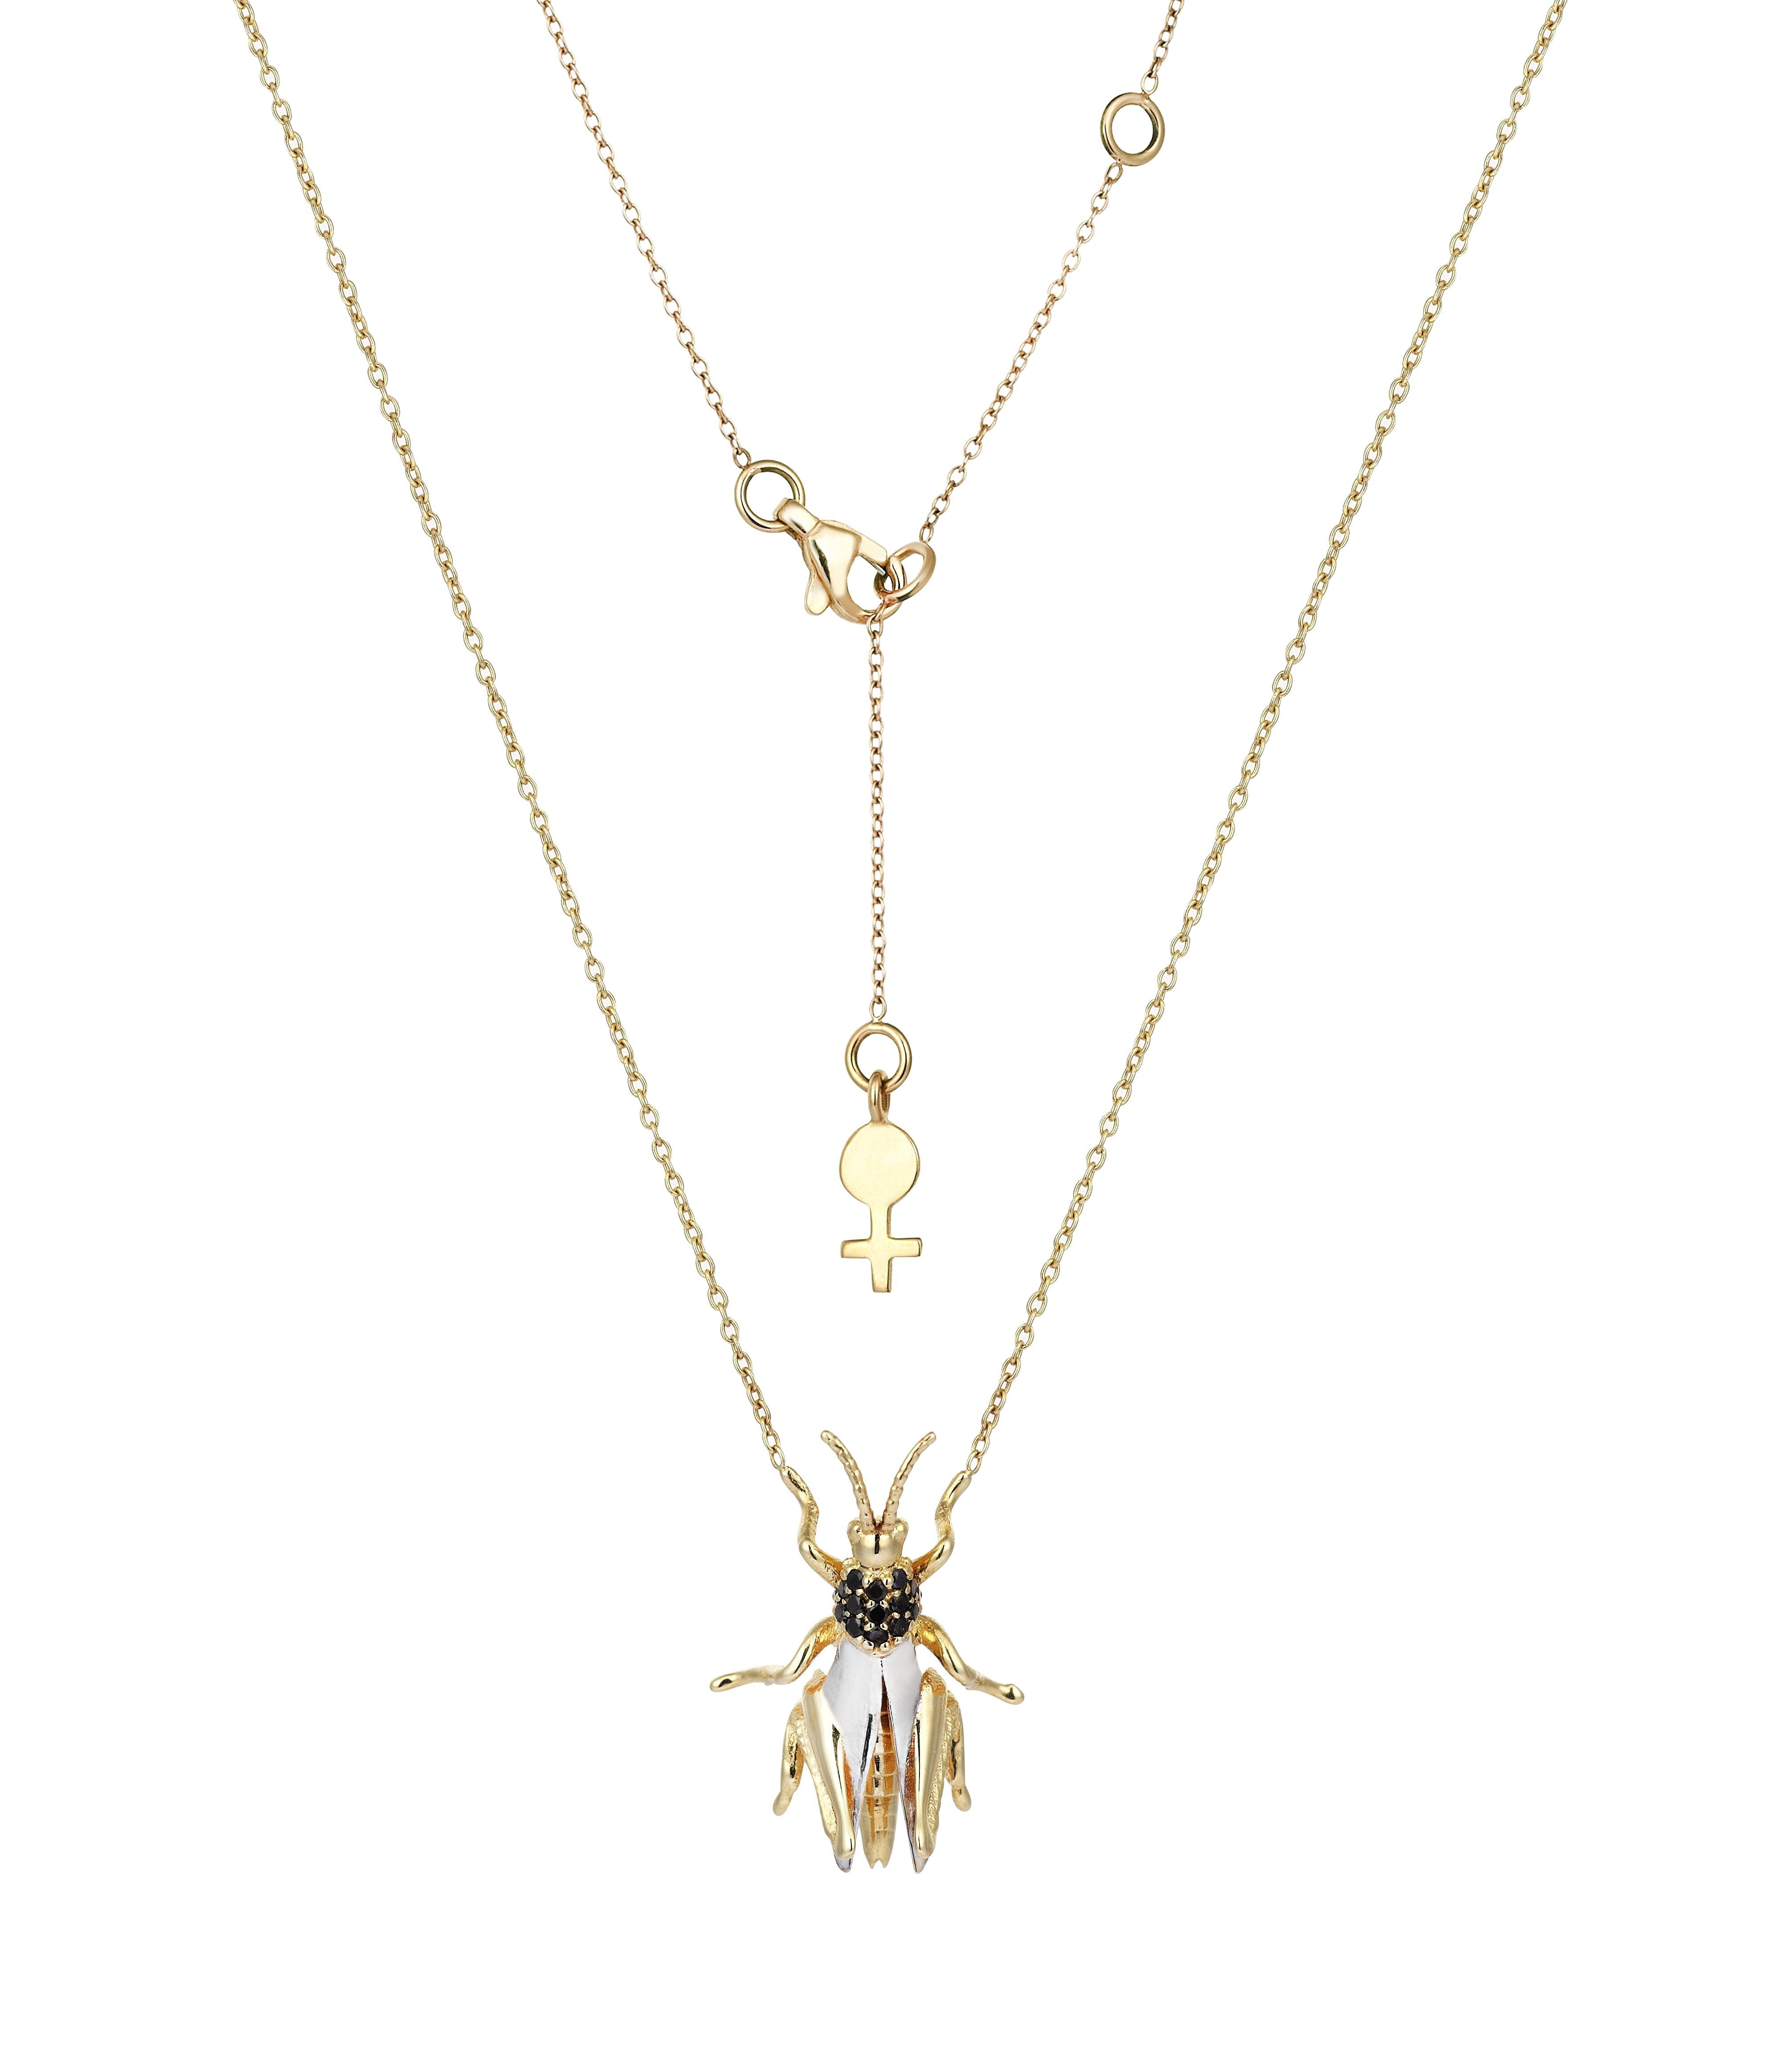 Grasshopper Necklace in Yellow Gold - Her Story Shop